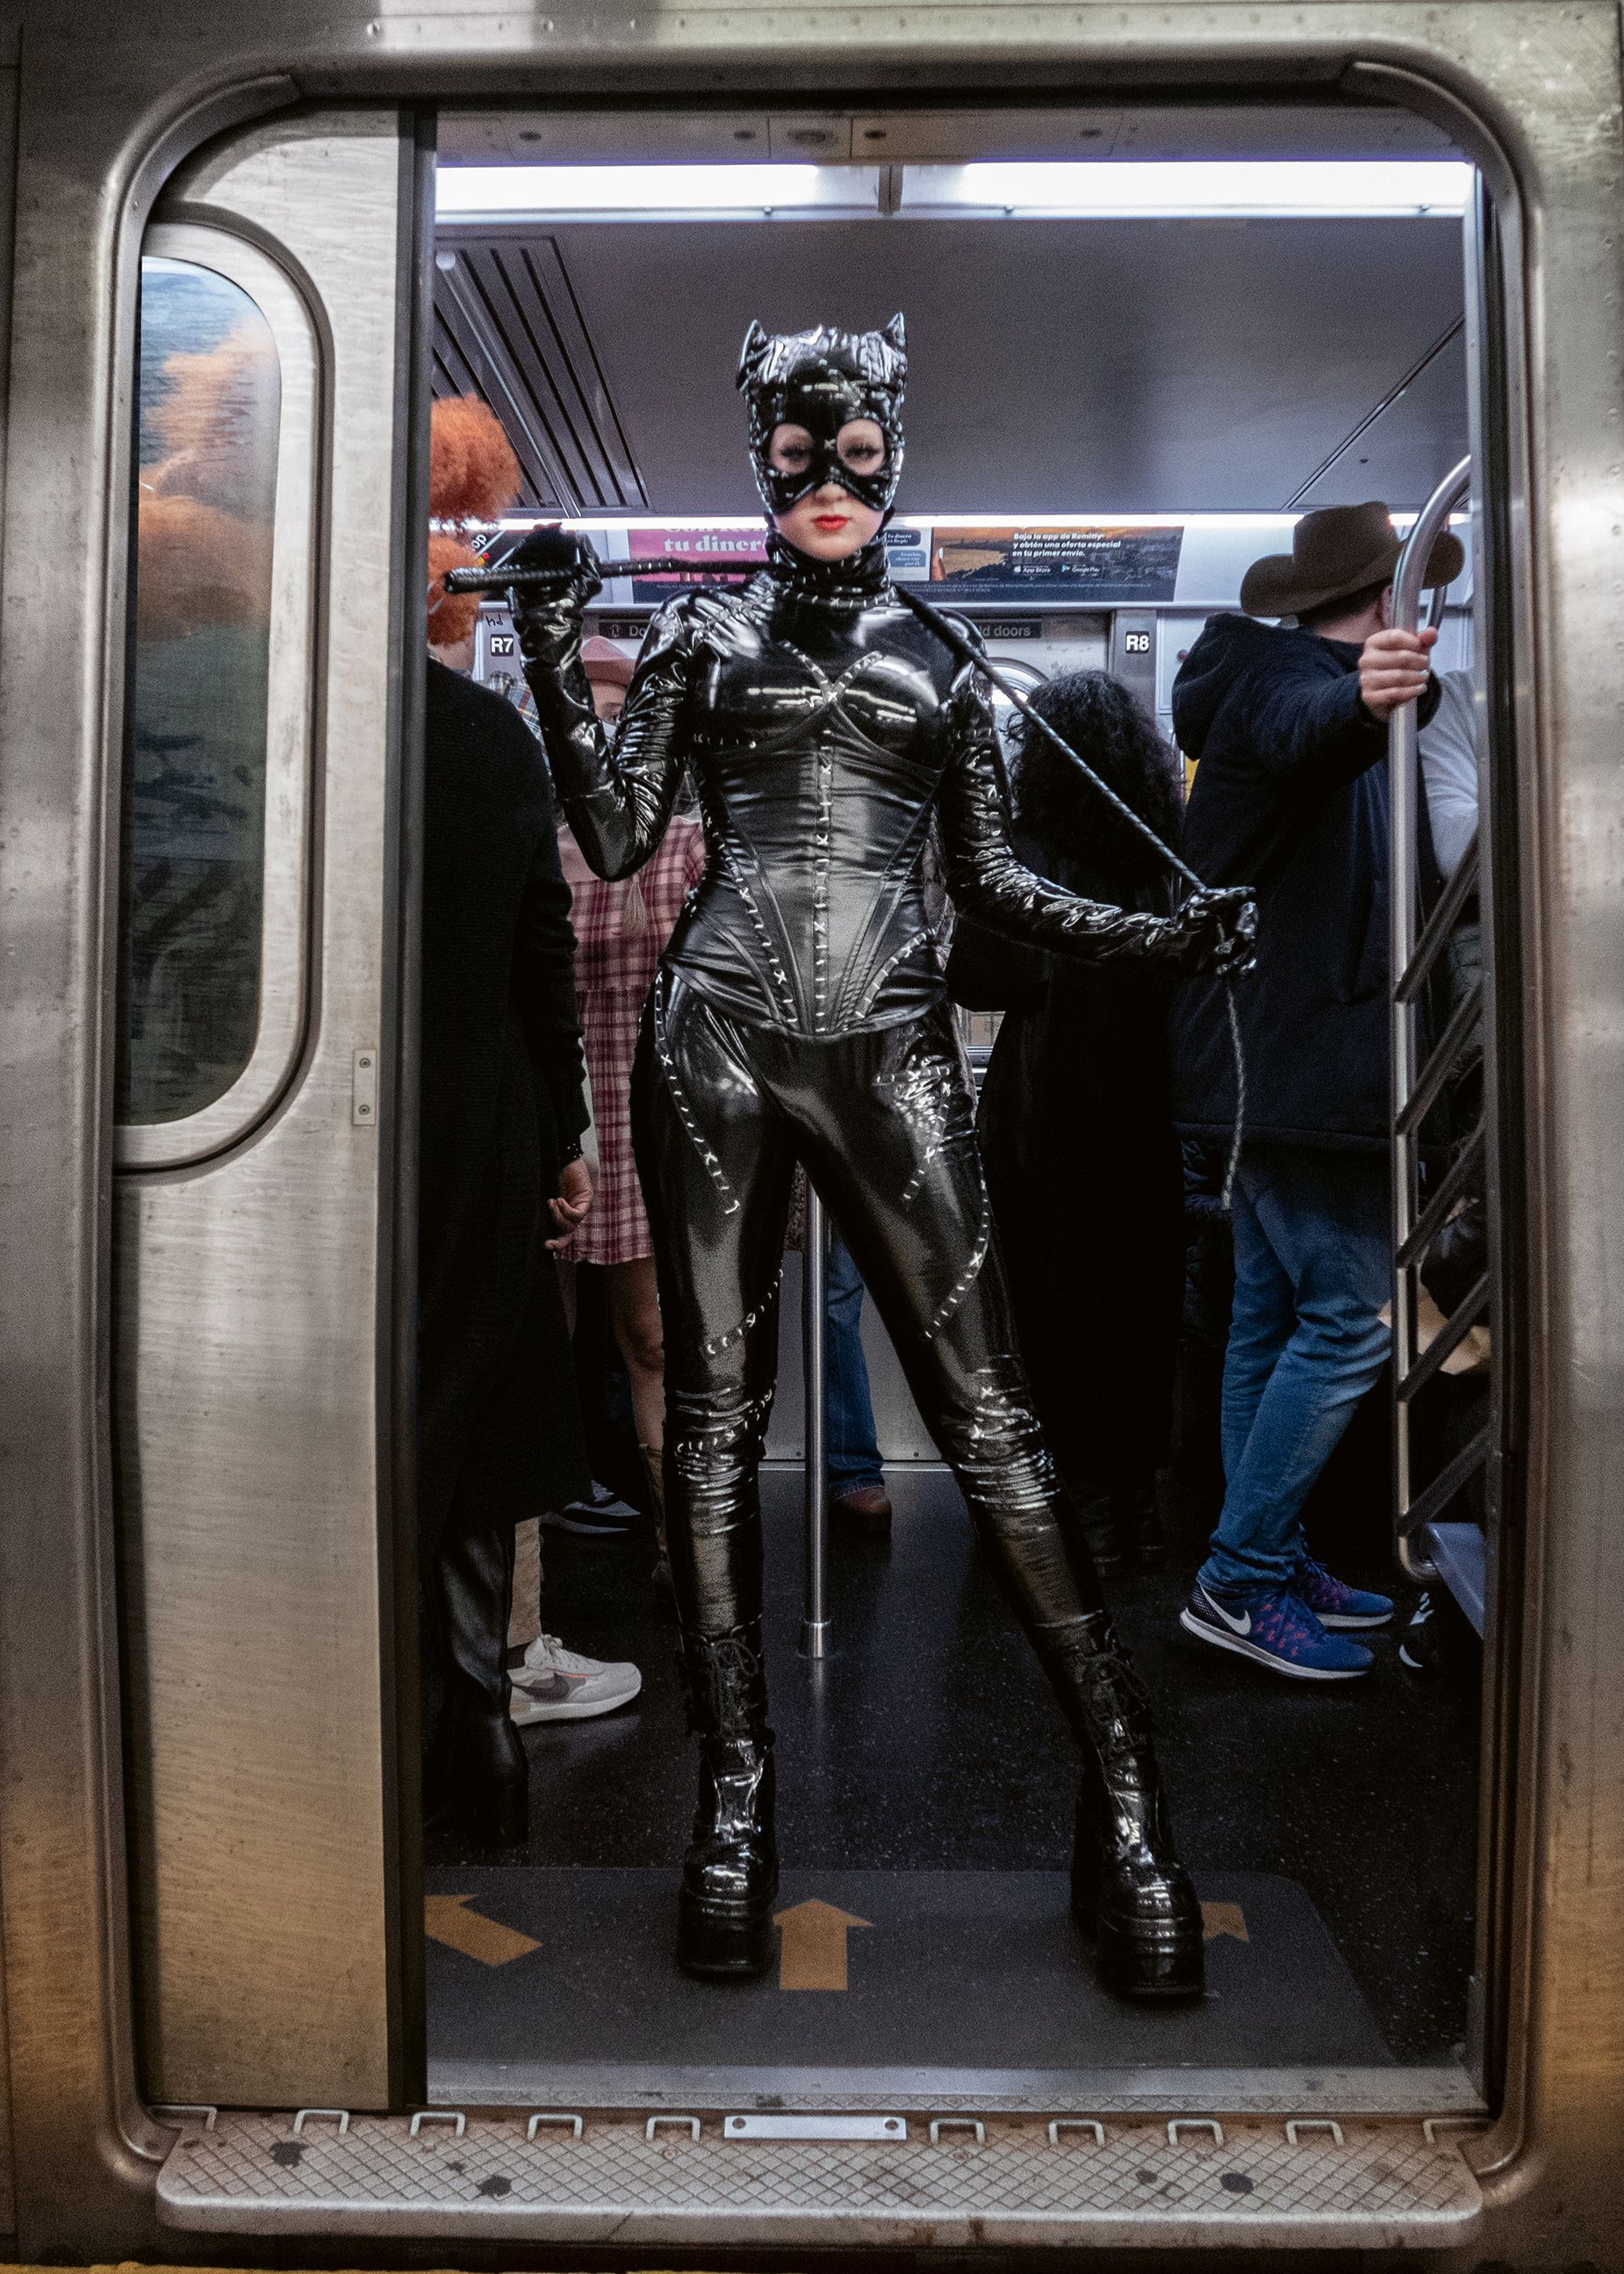 Catwoman stands clear of the closing doors.